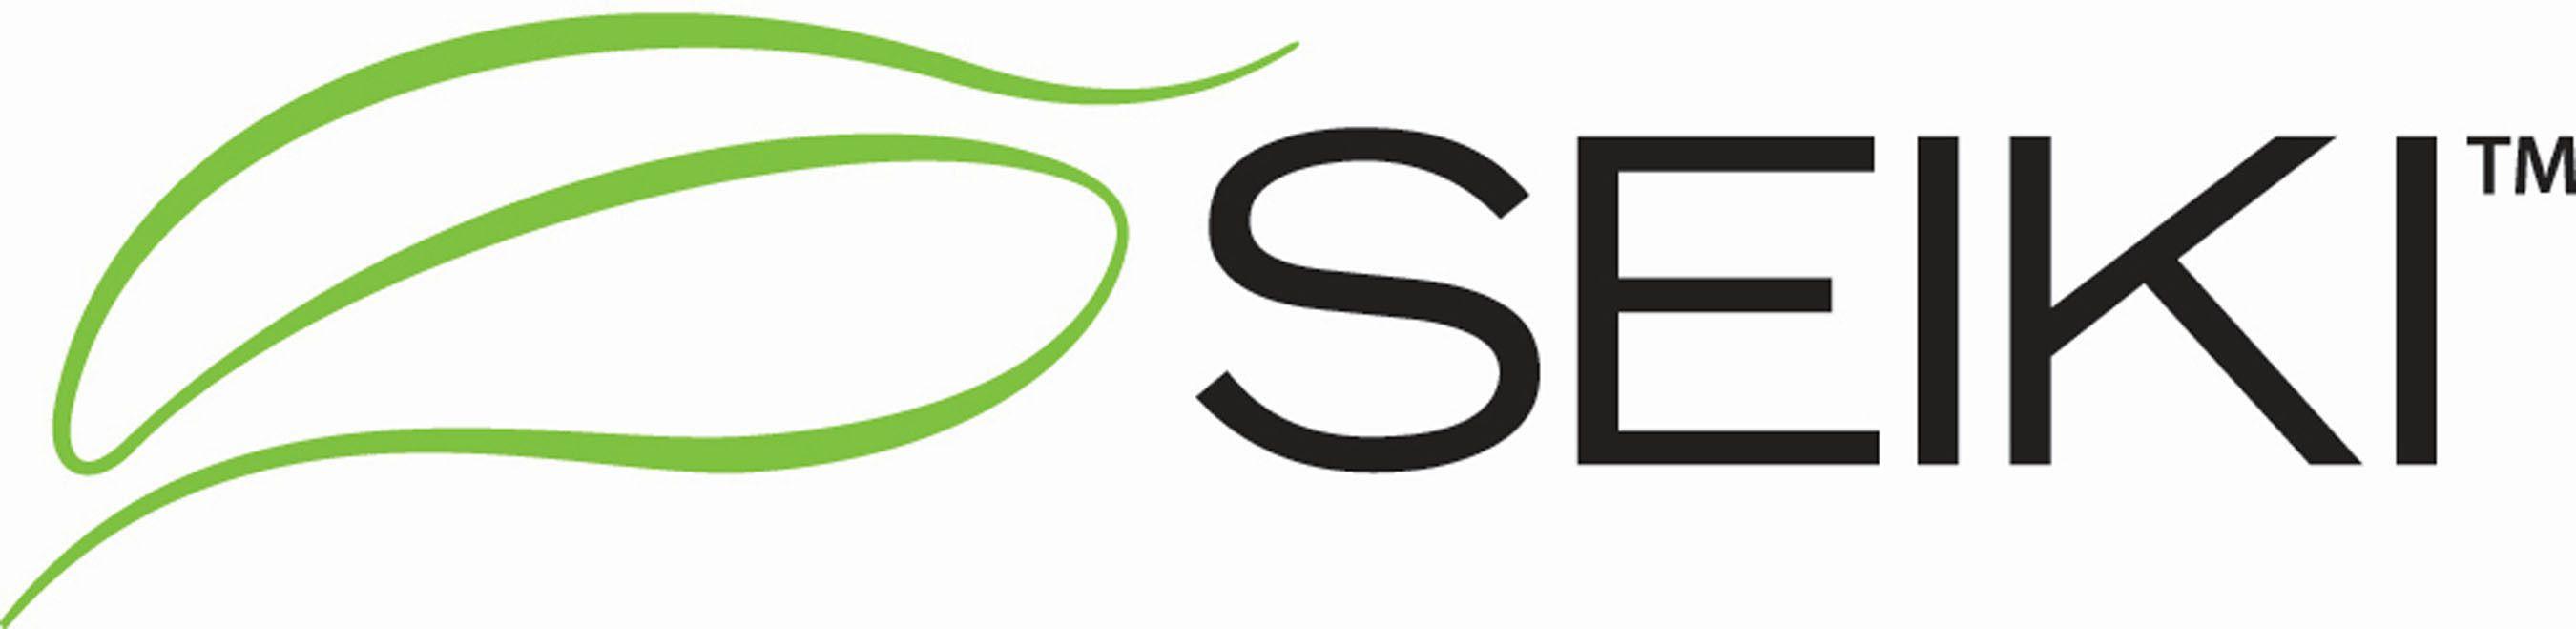 Seiki Logo - Seiki First To Deliver Freeview Connect To The U.K.